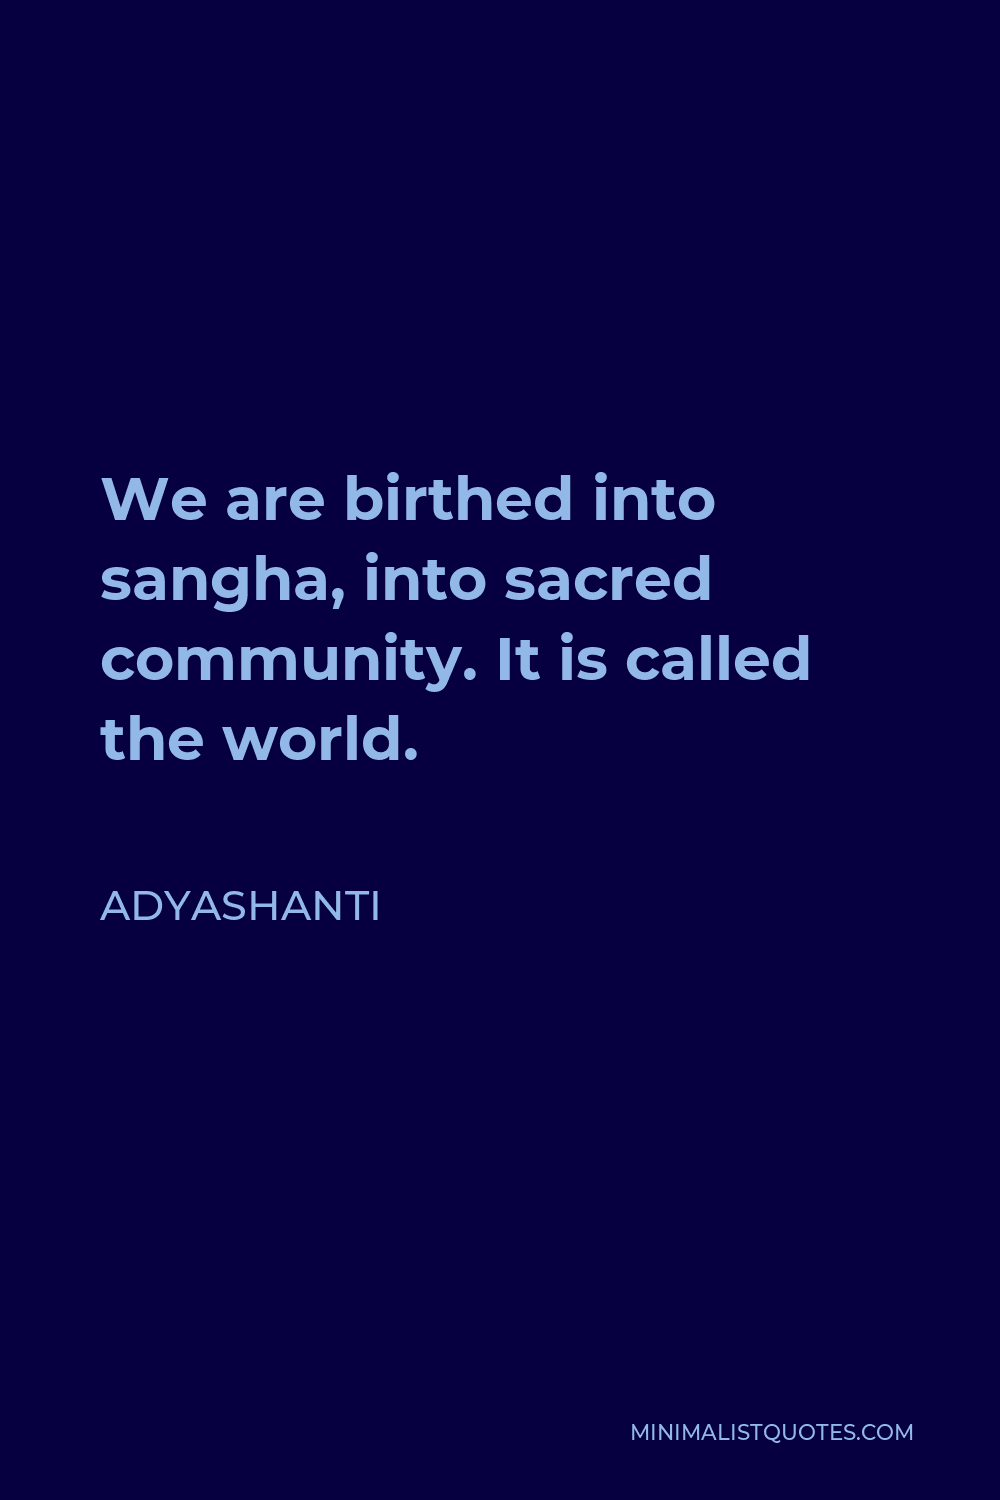 Adyashanti Quote - We are birthed into sangha, into sacred community. It is called the world.